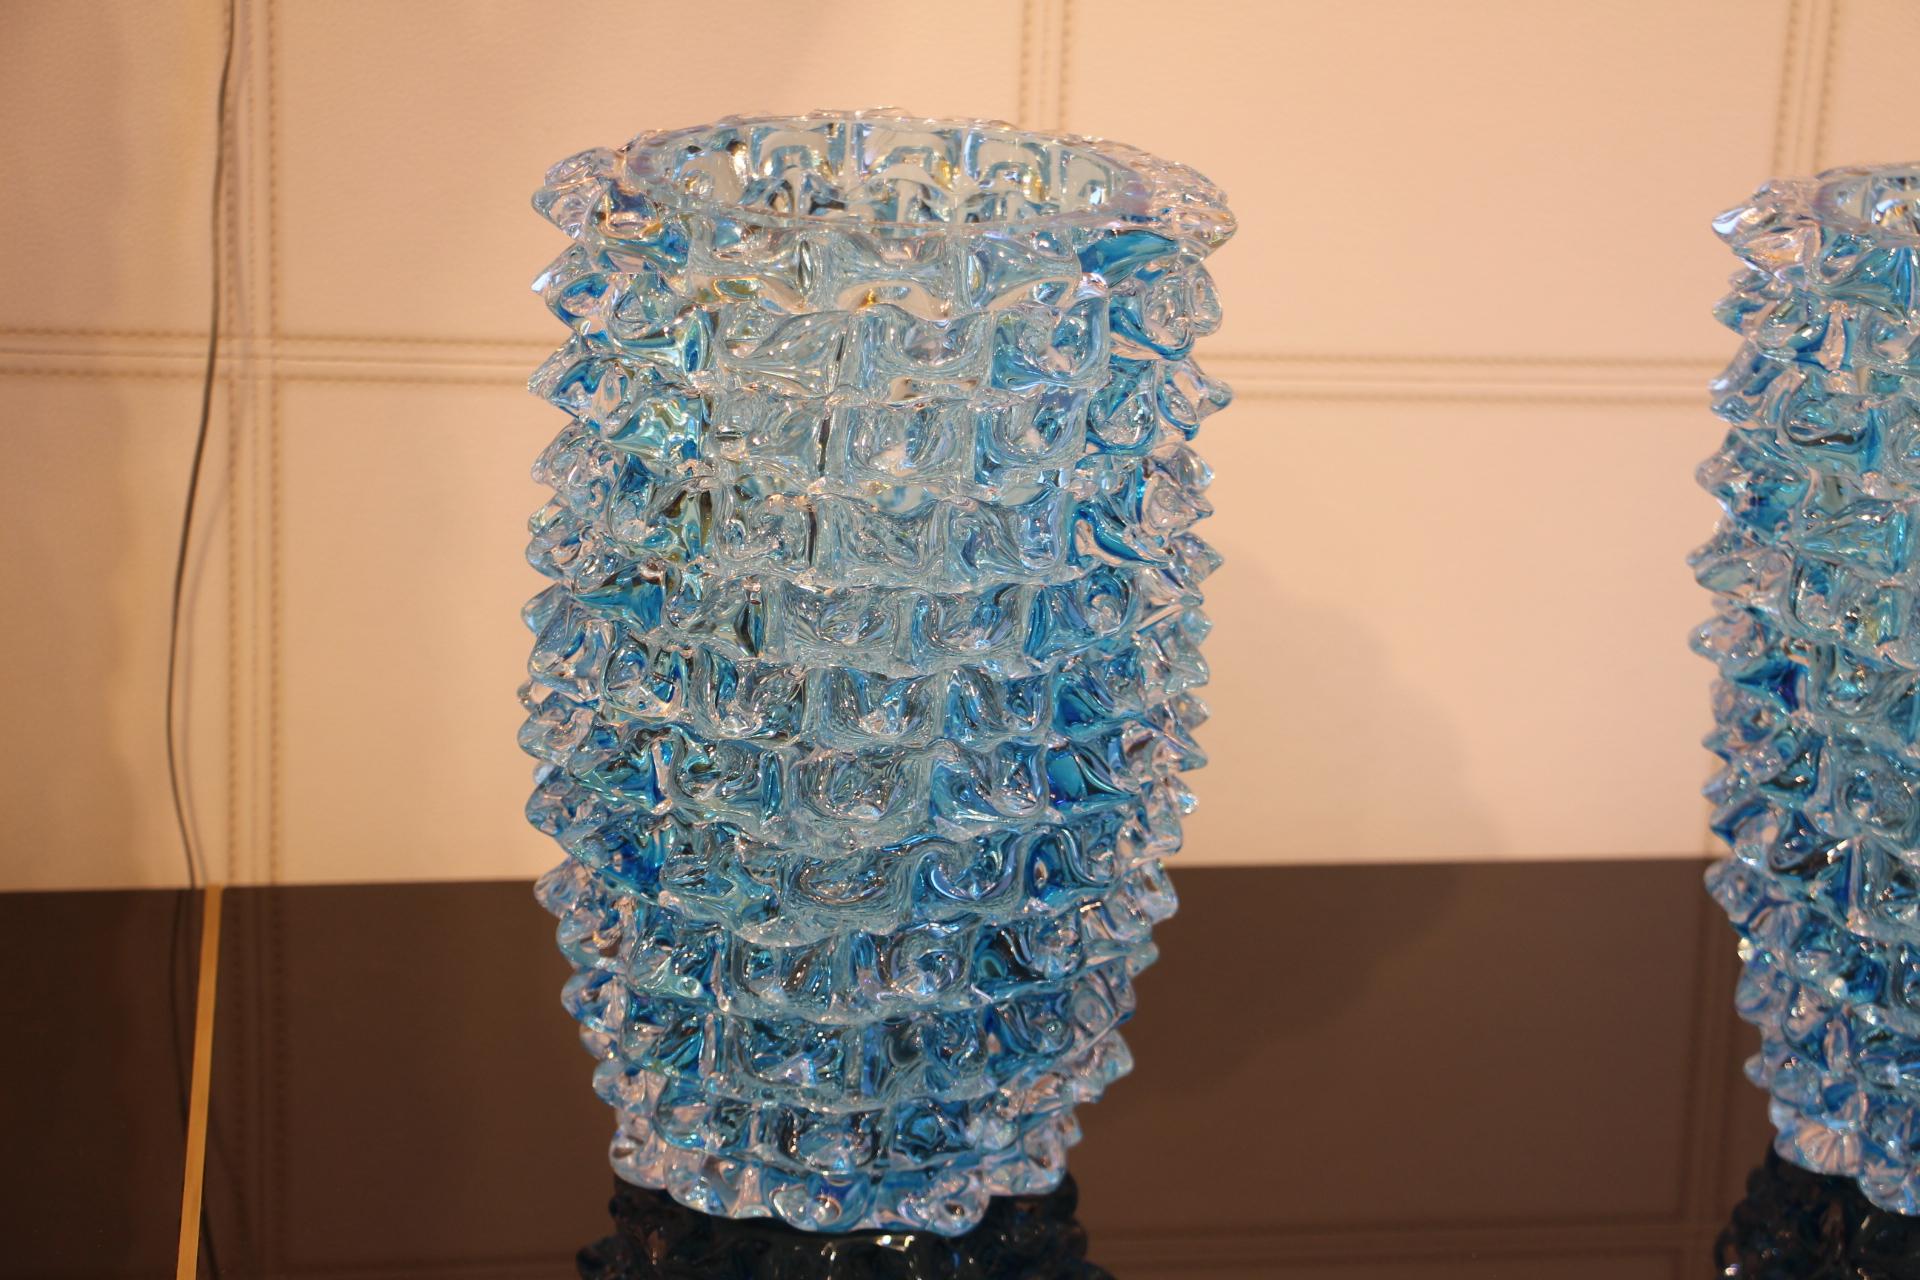 Mid-Century Modern Pair of Turquoise Blue Vase in Murano Glass with Spikes Decor, Barovier Style